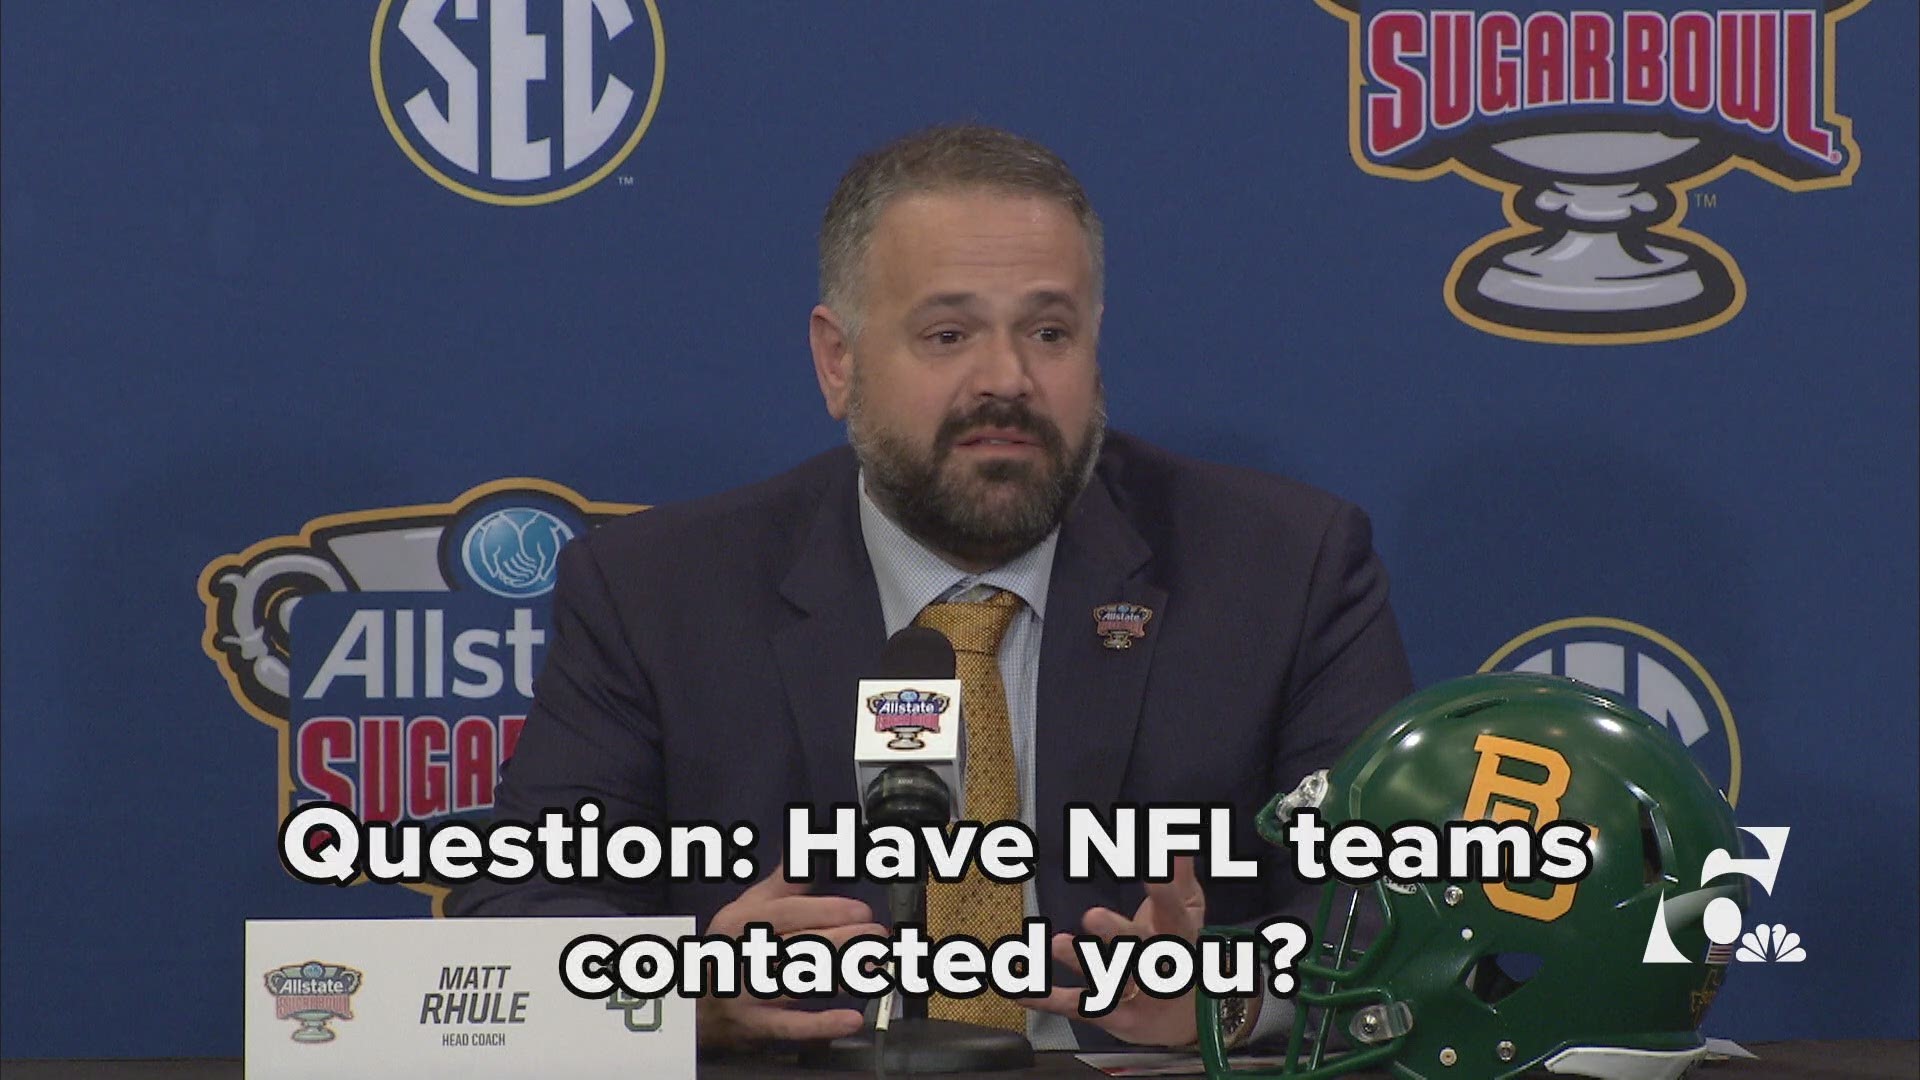 Amid escalating rumors of NFL teams' interest in his services, Baylor football coach Matt Rhule addresses his future ahead of the Allstate Sugar Bowl in New Orleans.